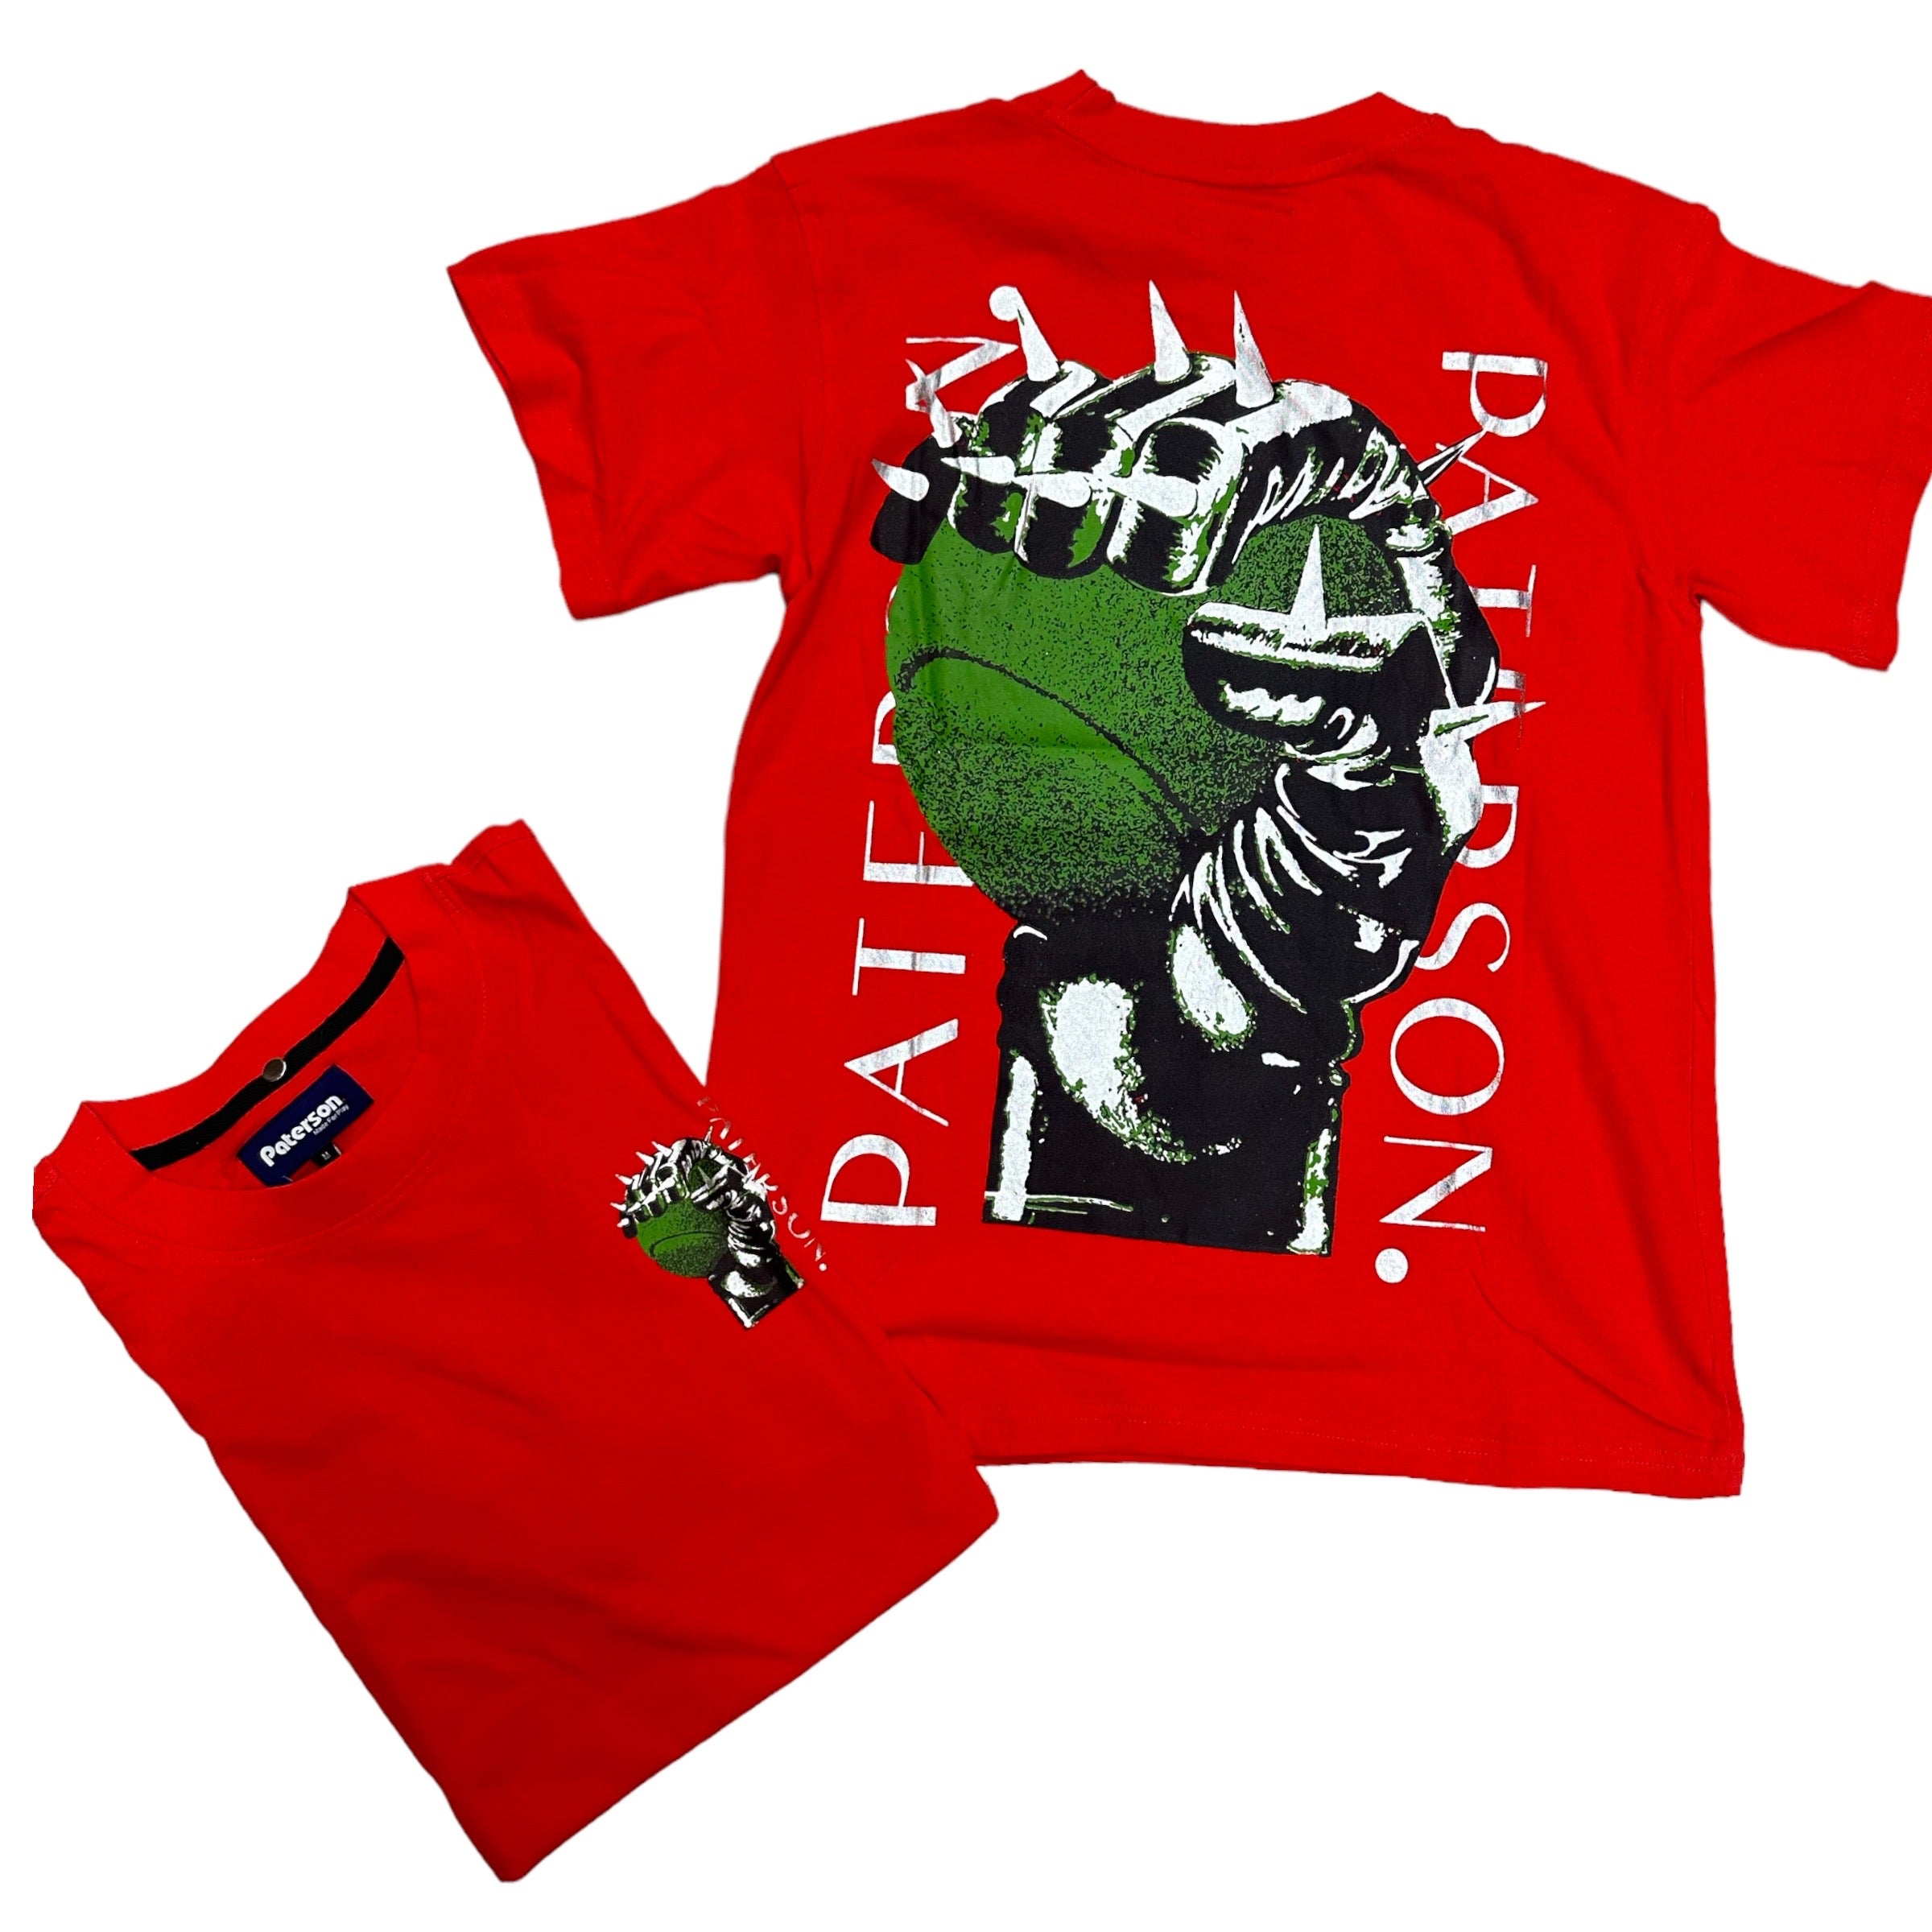 Paterson Hand T shirt Red p47